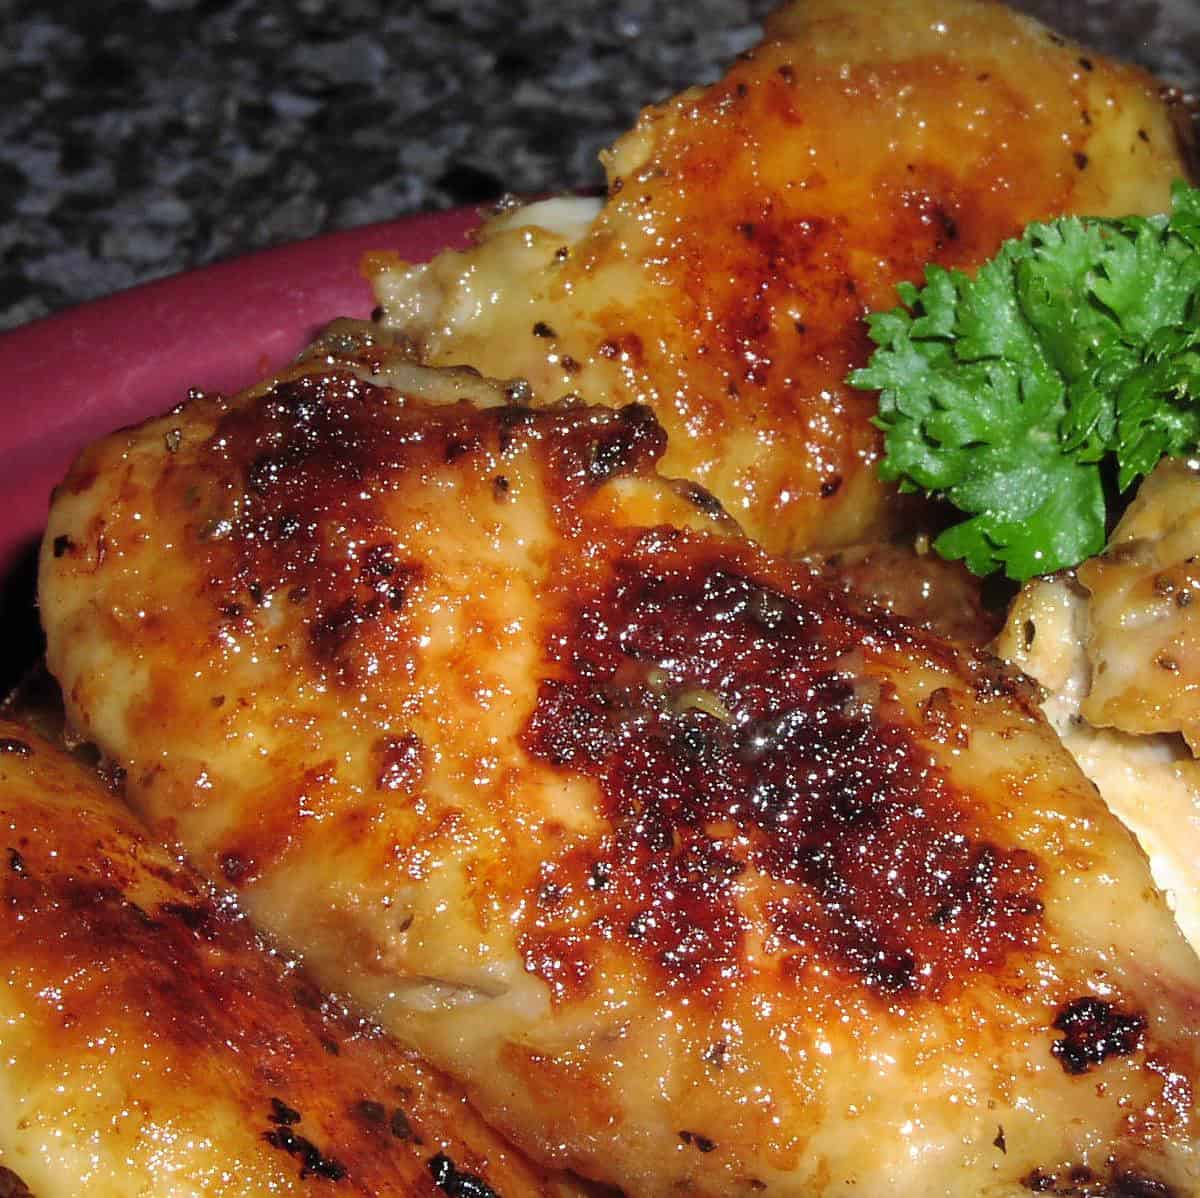  Sweet and tangy – that's the flavor you'll get from this baked chicken recipe.